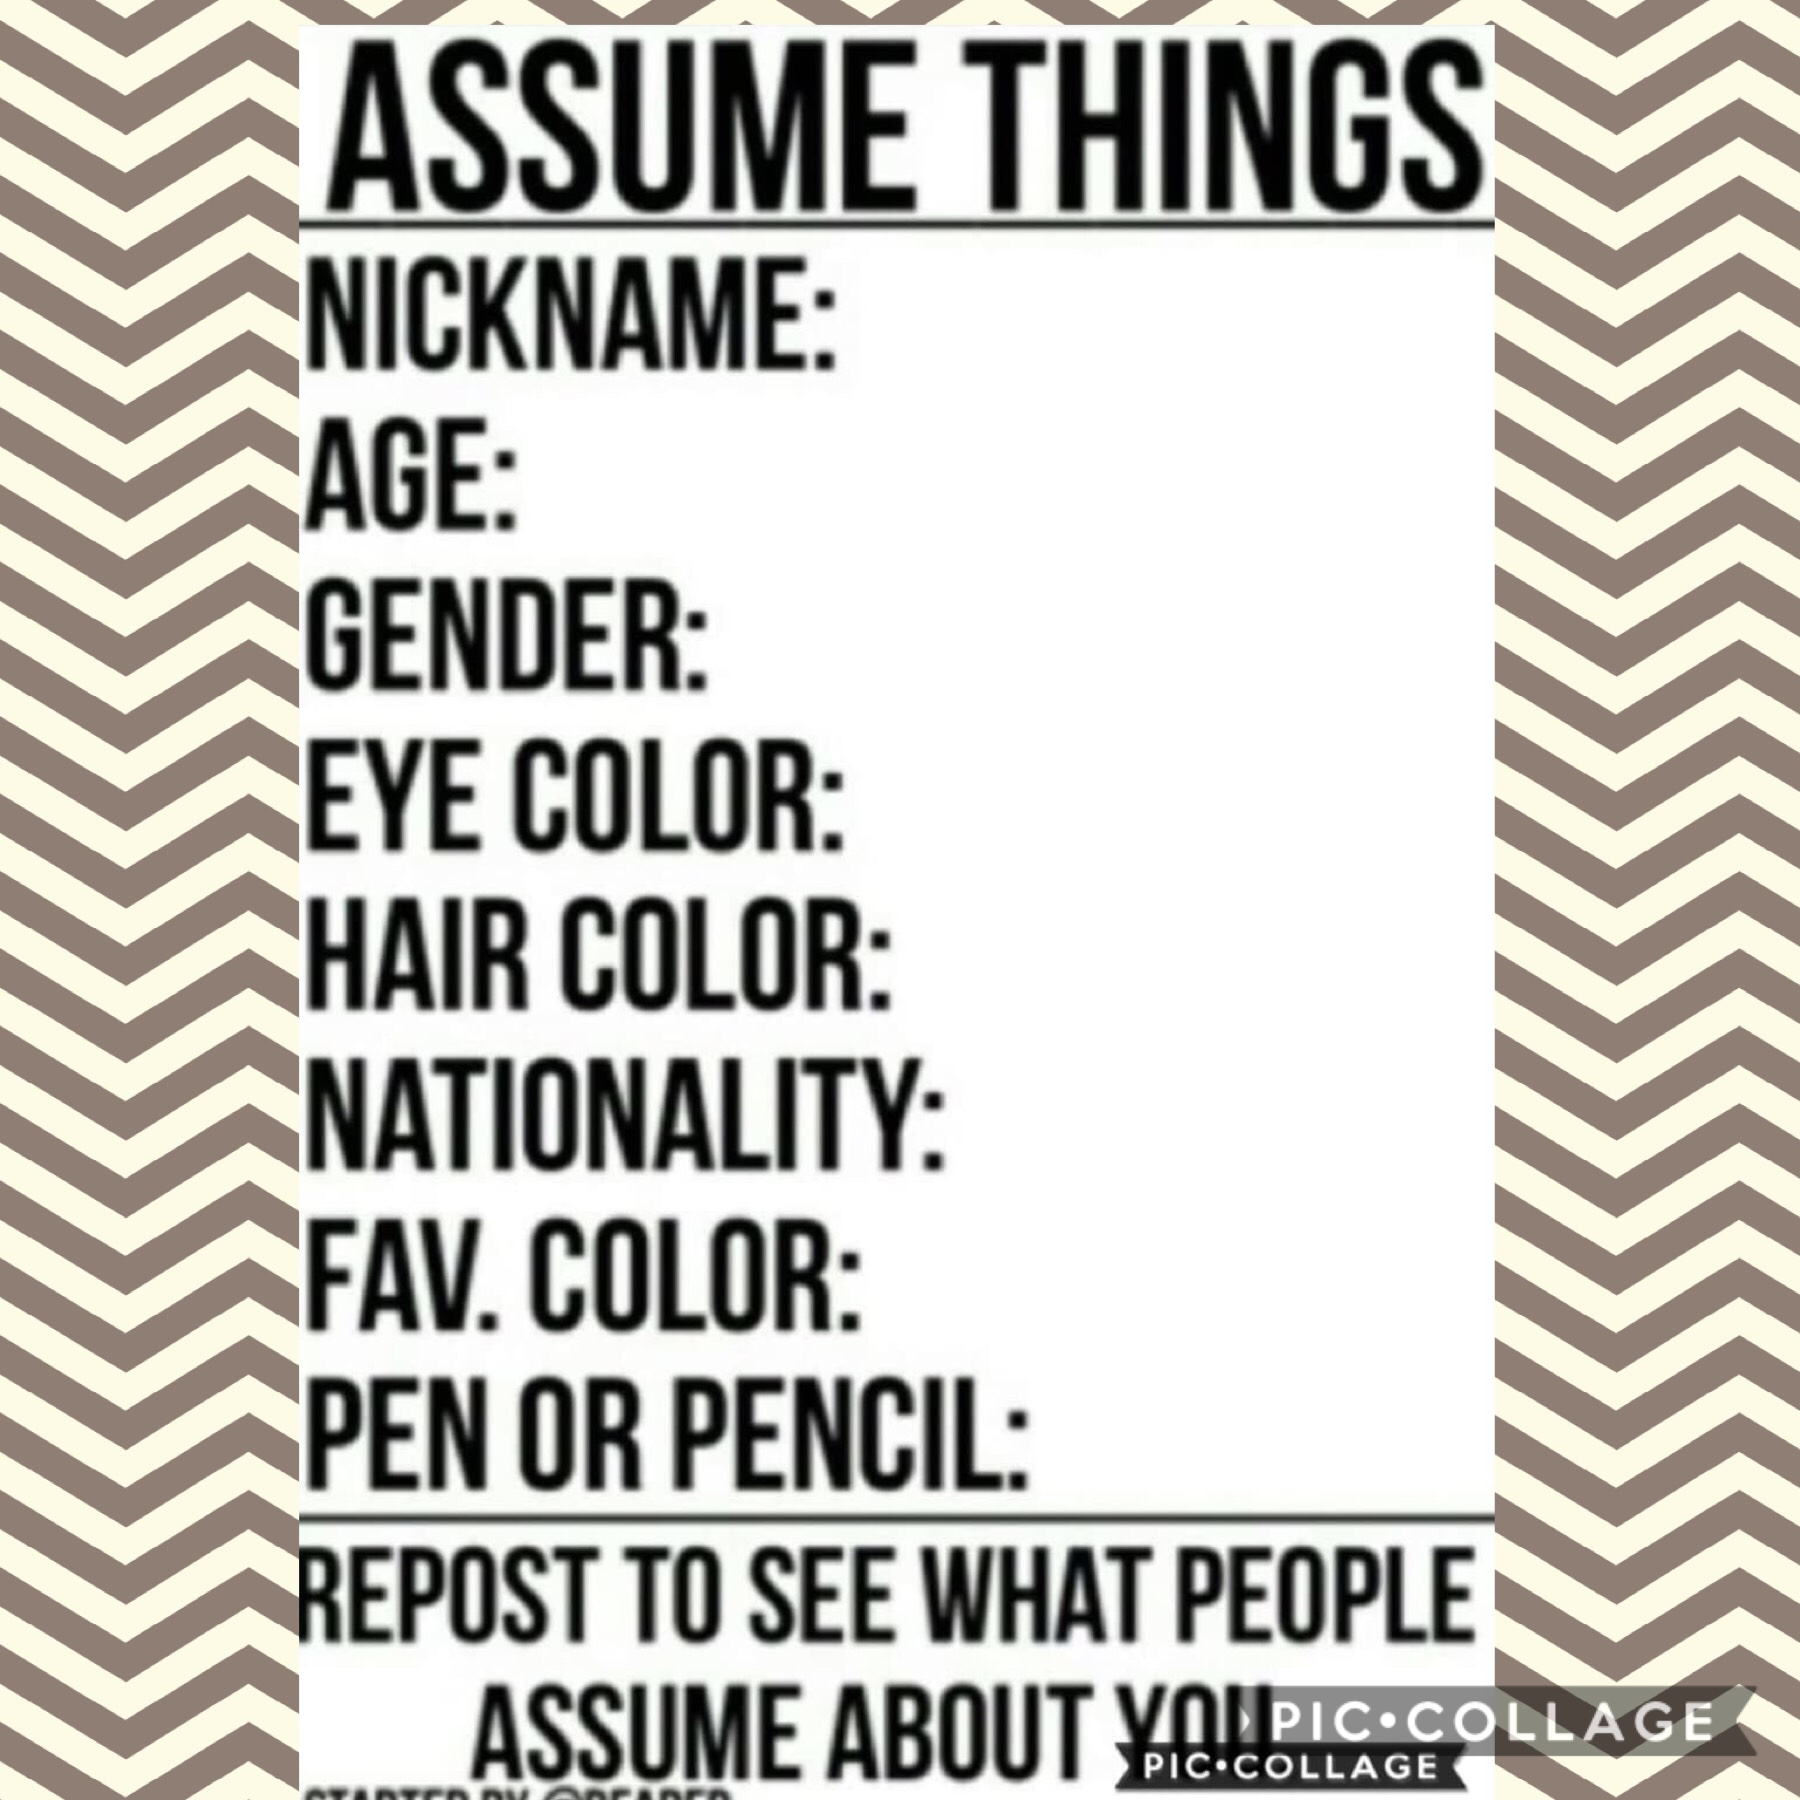 What do y’all assume about me?